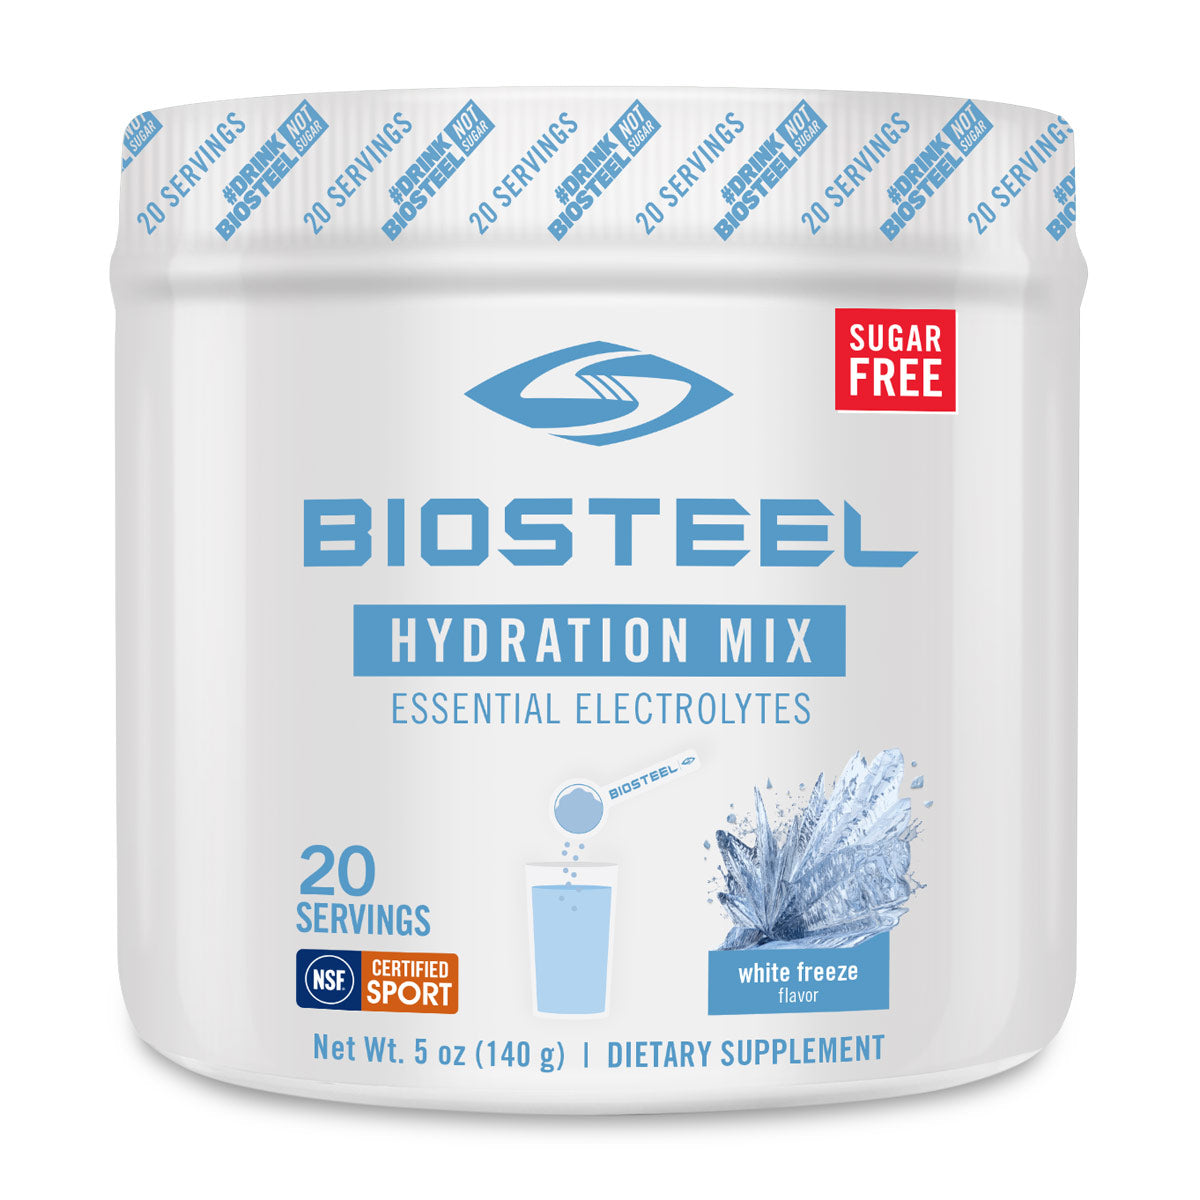 BioSteel Hydration Mix: The Athlete's Choice for Natural Hydration